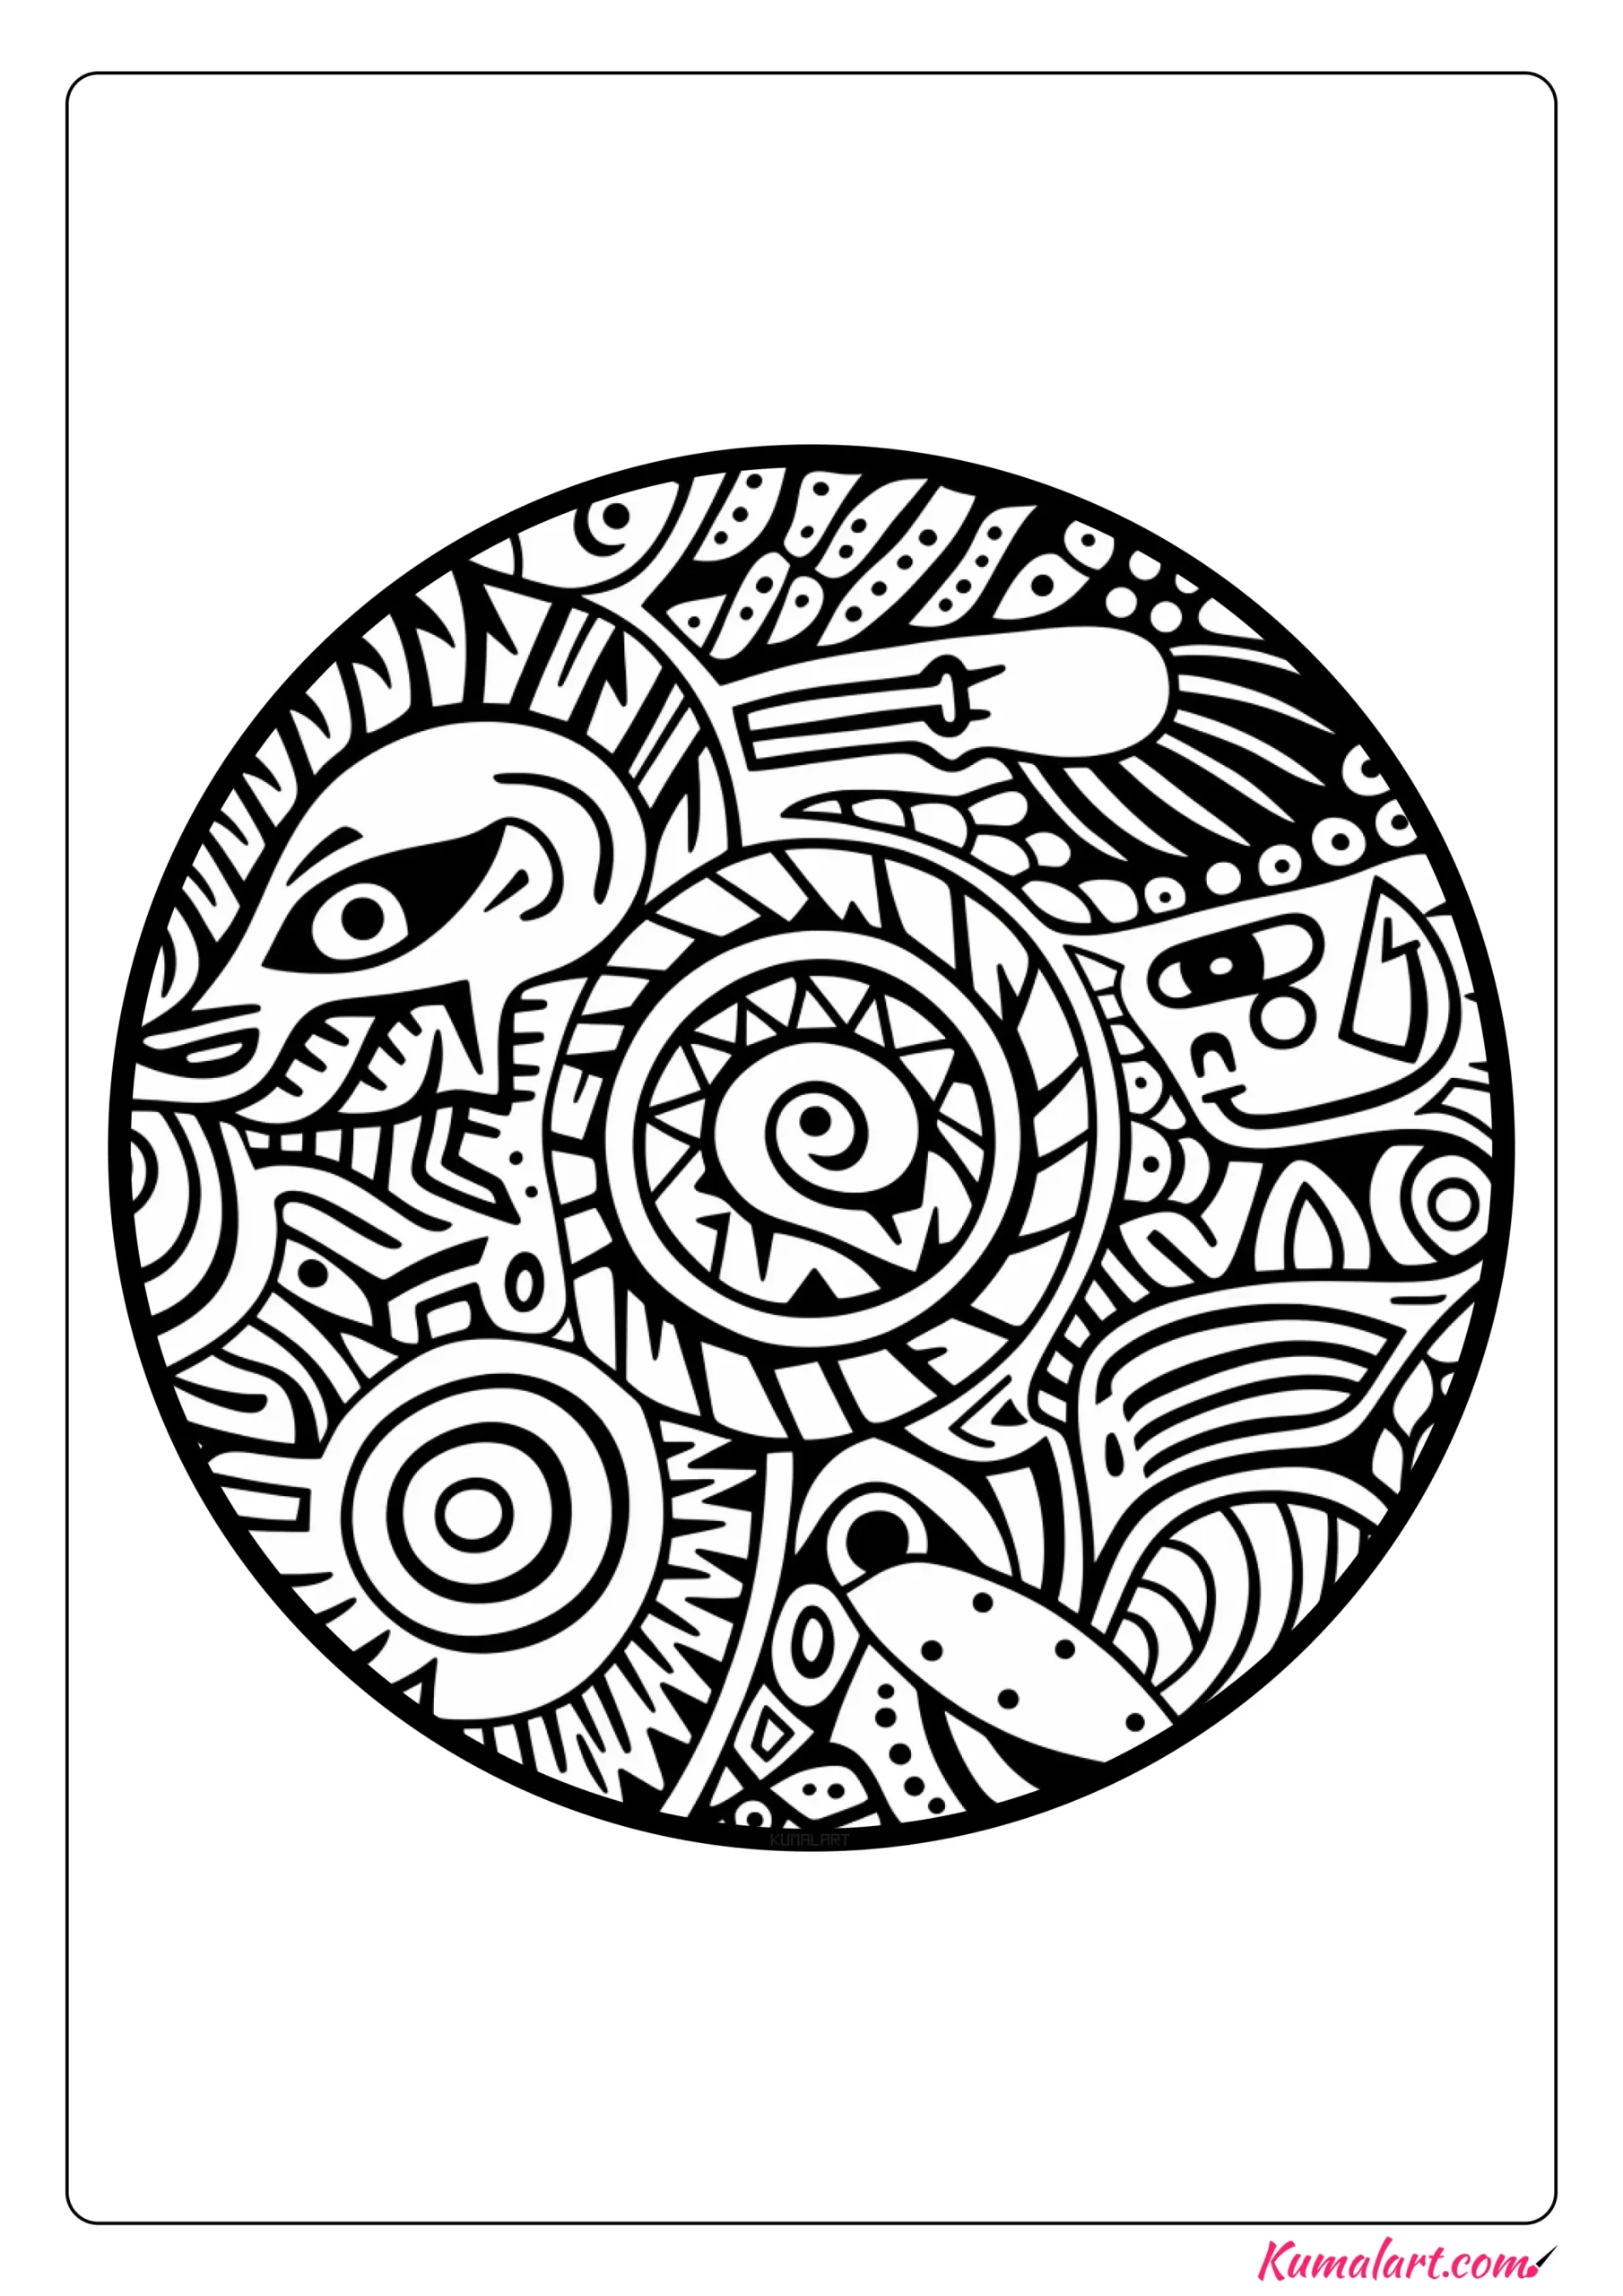 Comforting Stress Relief Coloring Page